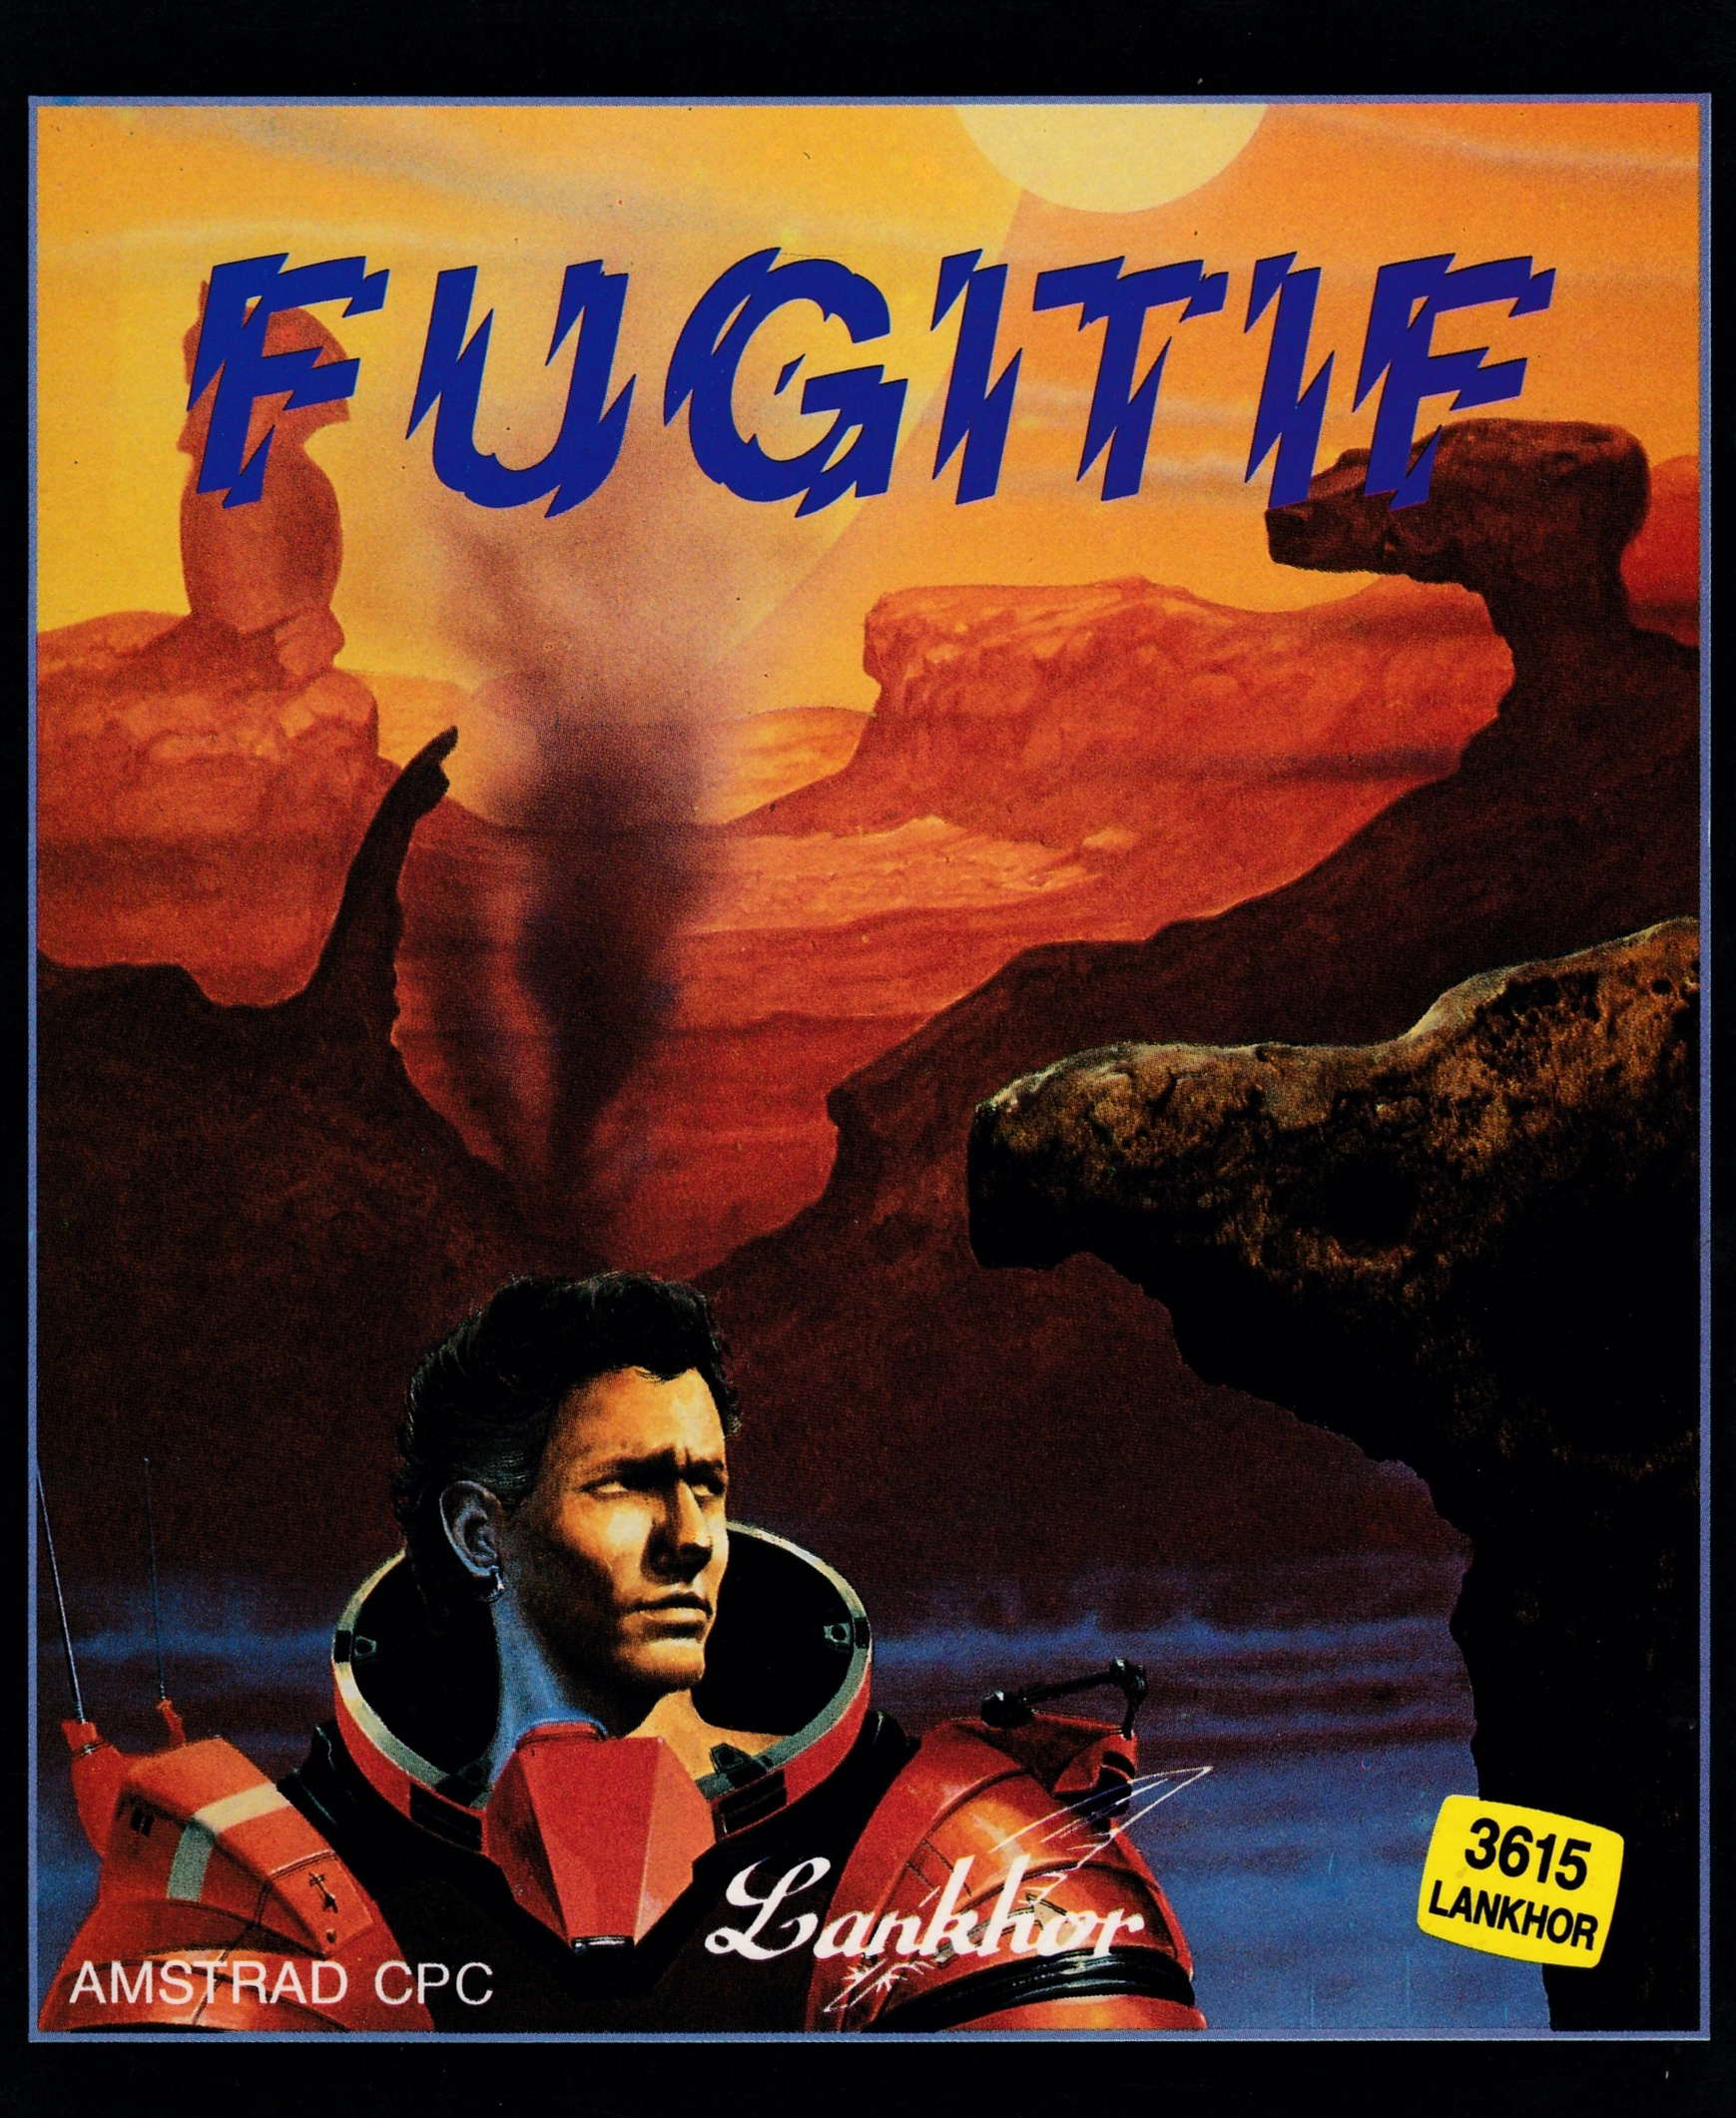 screenshot of the Amstrad CPC game Fugitif by GameBase CPC